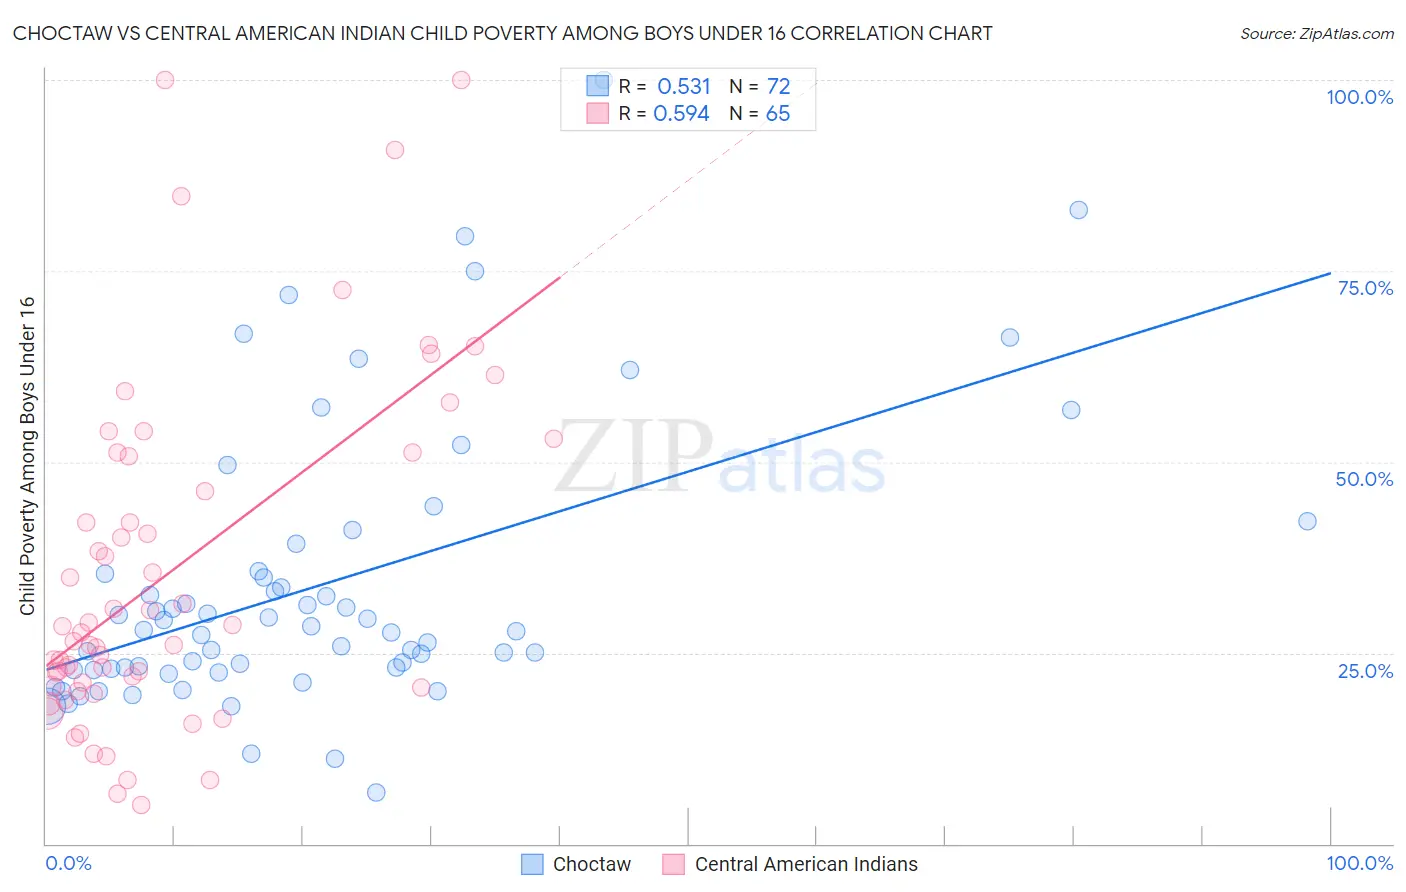 Choctaw vs Central American Indian Child Poverty Among Boys Under 16